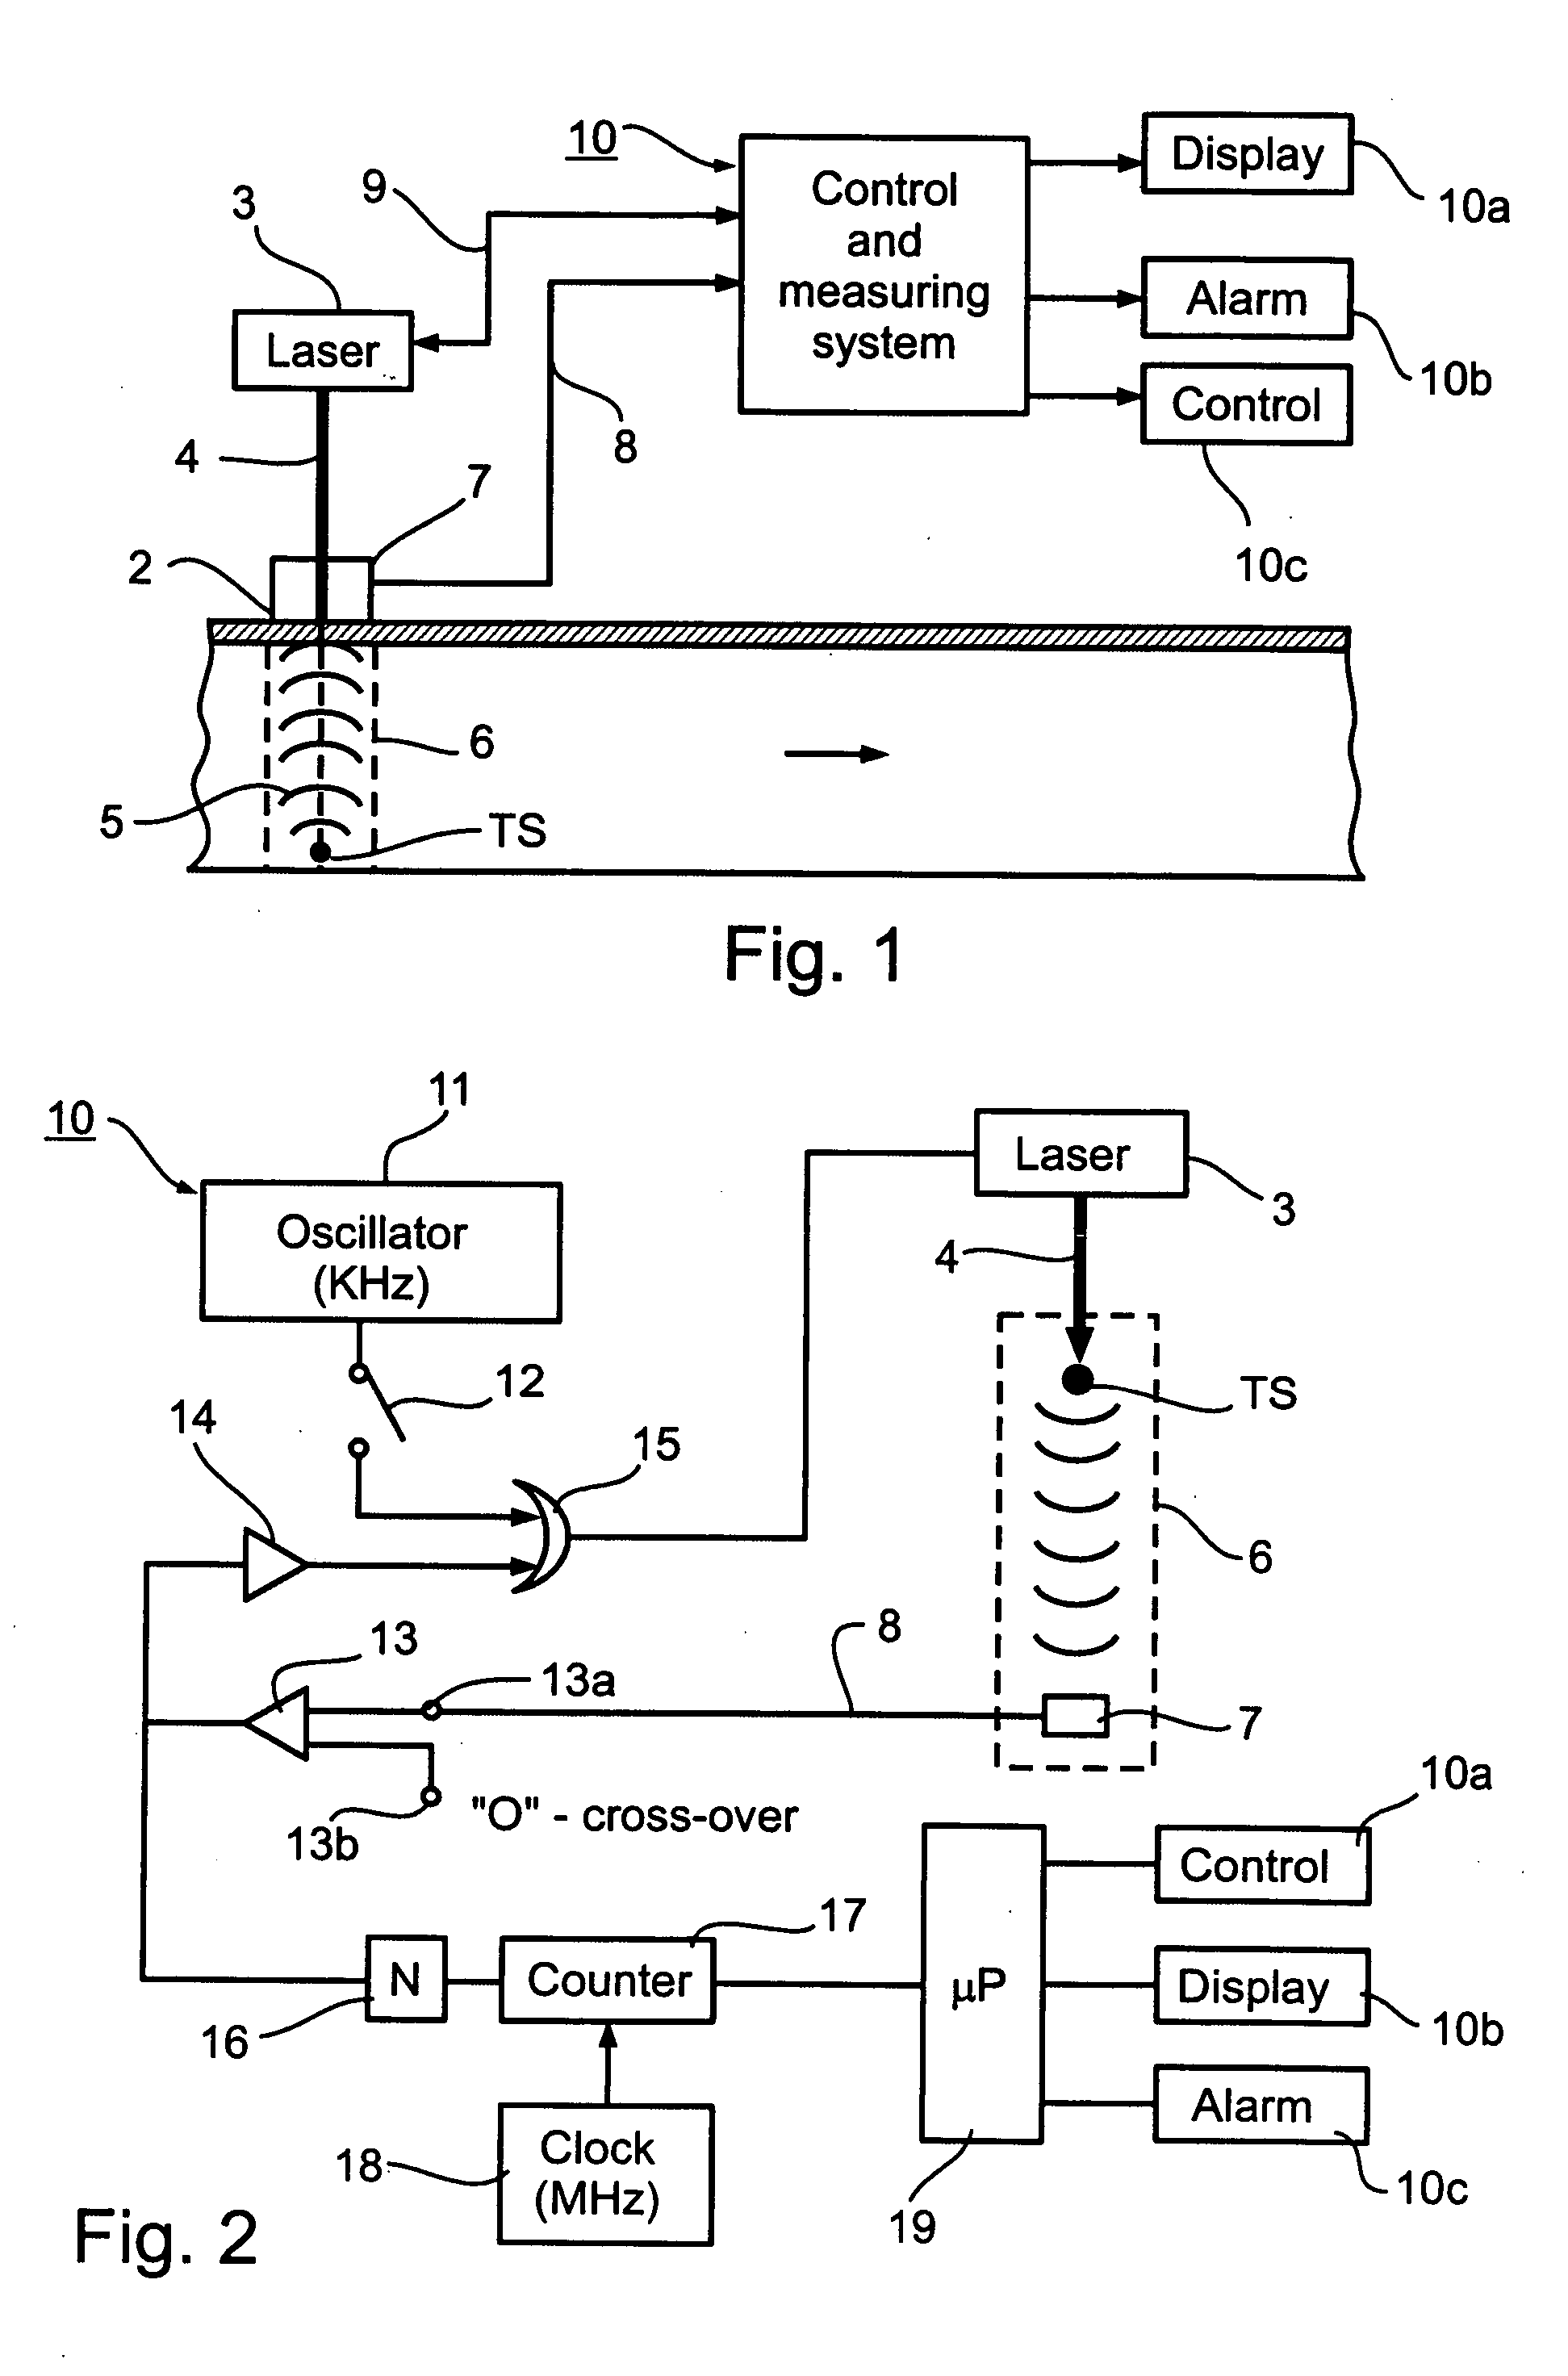 Method and apparatus for non-invasively monitoring concentrations of glucose or other target substances